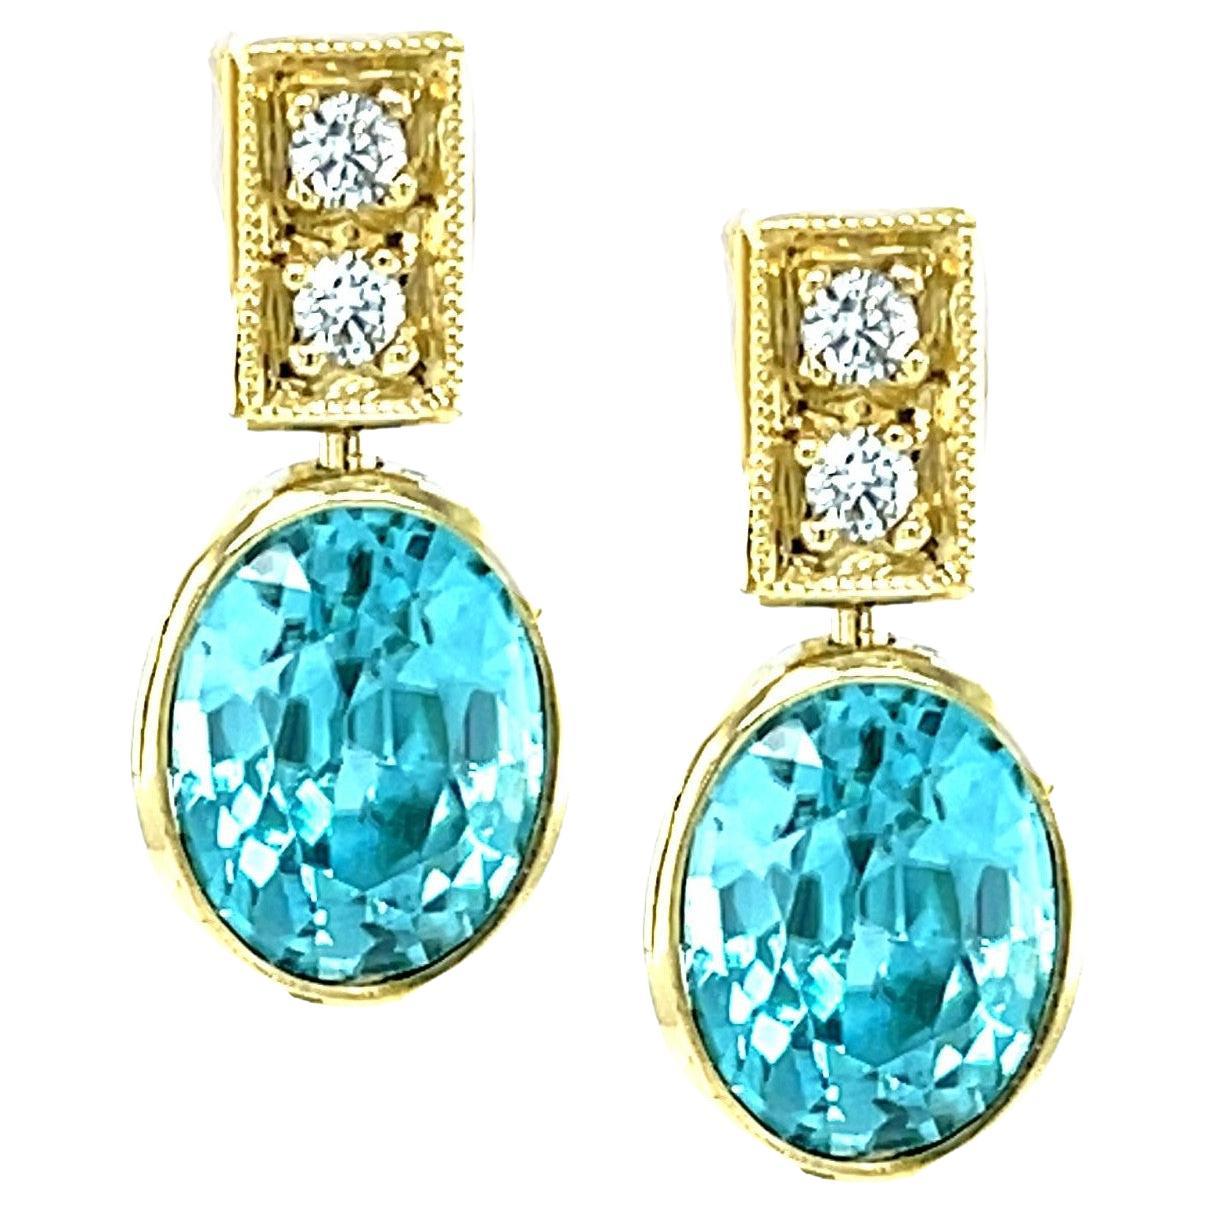 Blue Zircon and Diamond Drop Earrings in Yellow Gold, 9.38 Carats Total